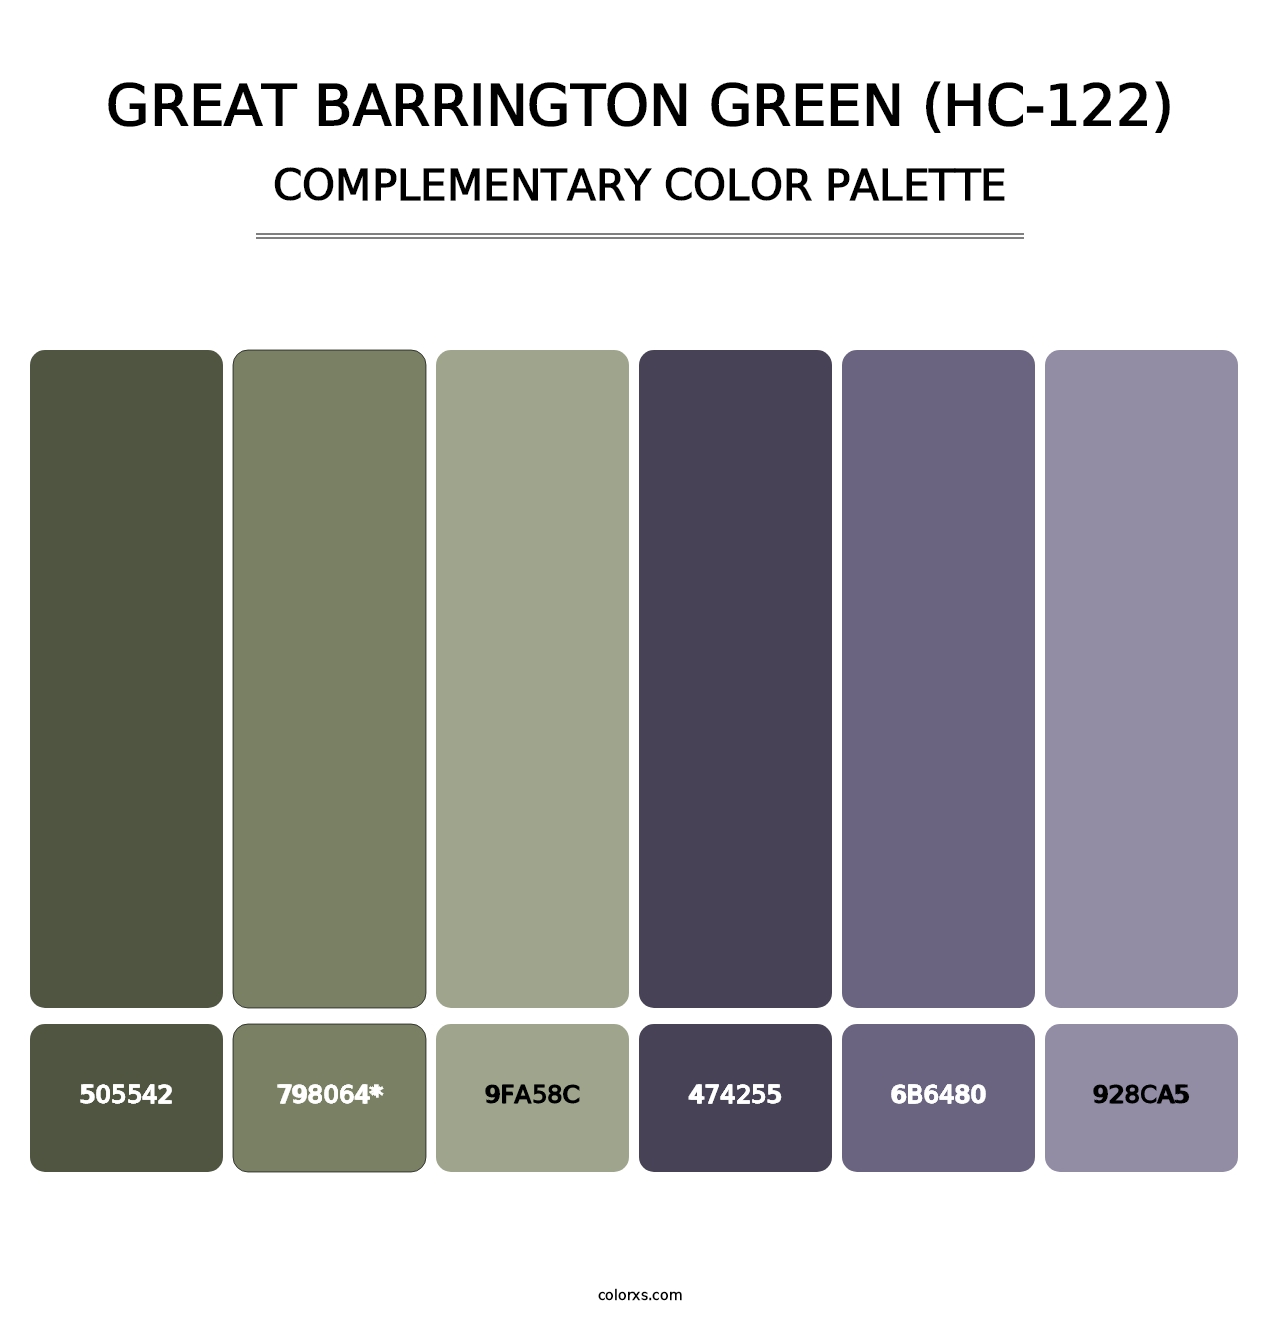 Great Barrington Green (HC-122) - Complementary Color Palette